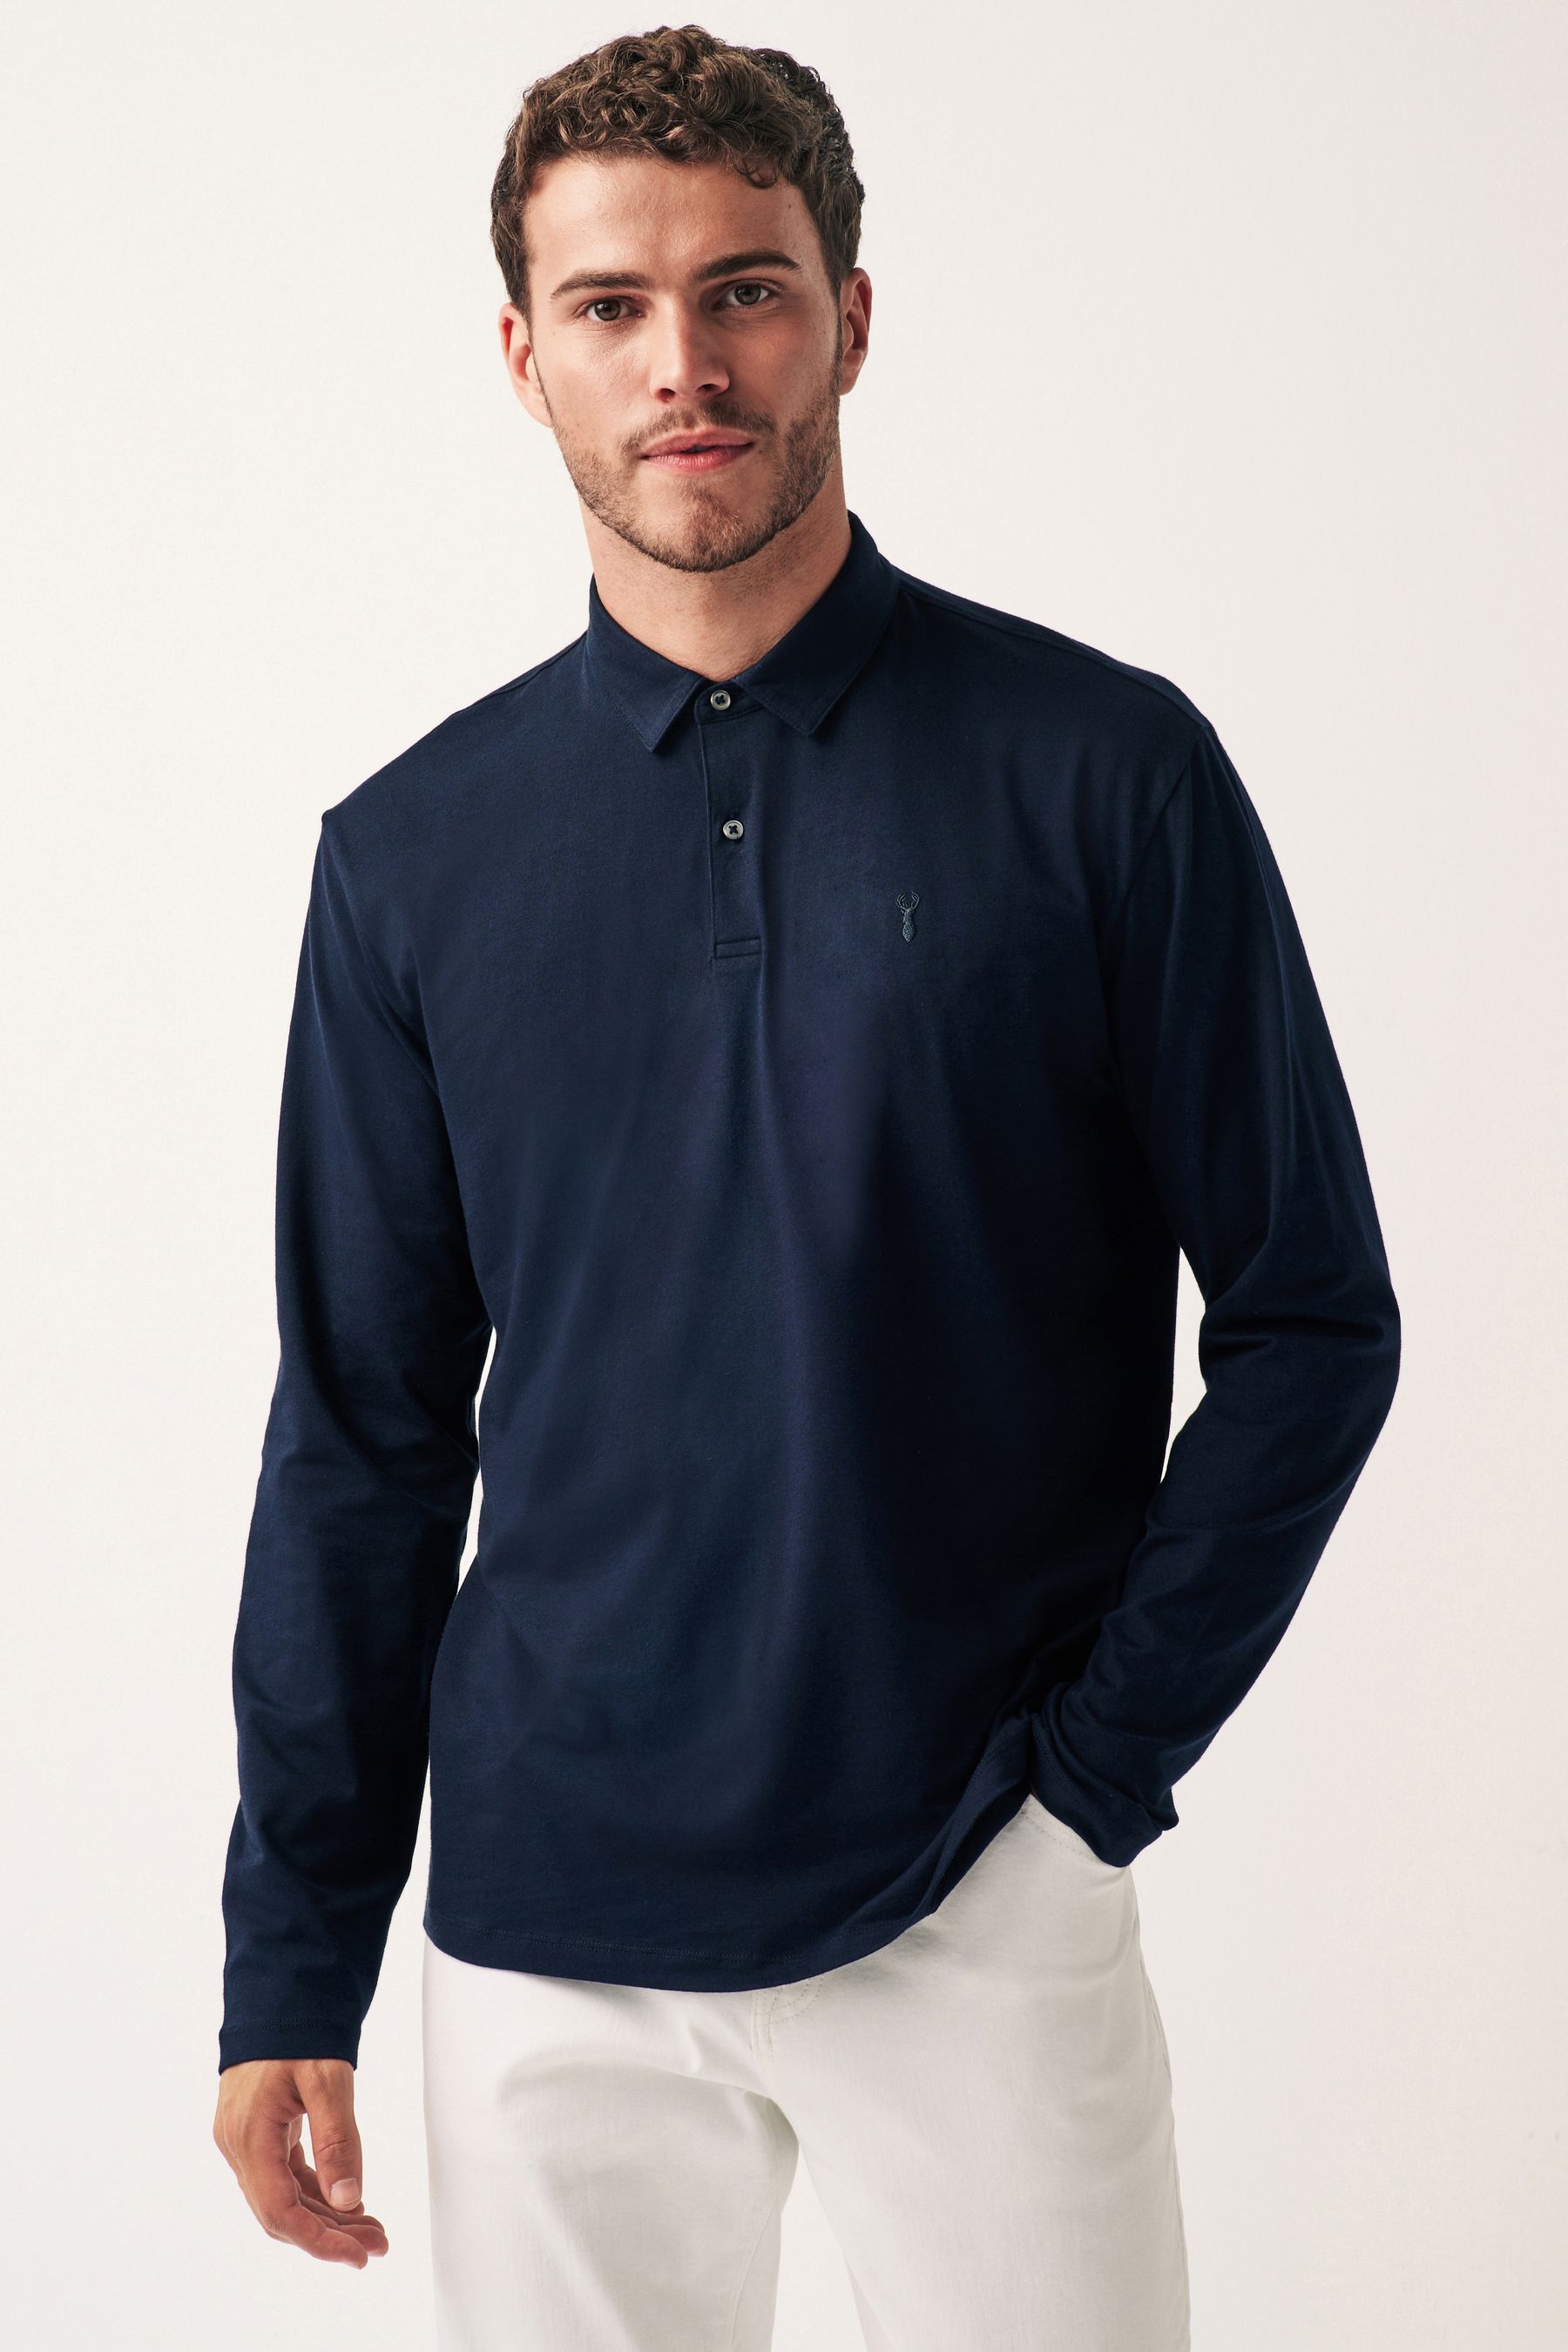 Buy Navy Blue Long Sleeve Jersey Polo Shirt from the Next UK online shop